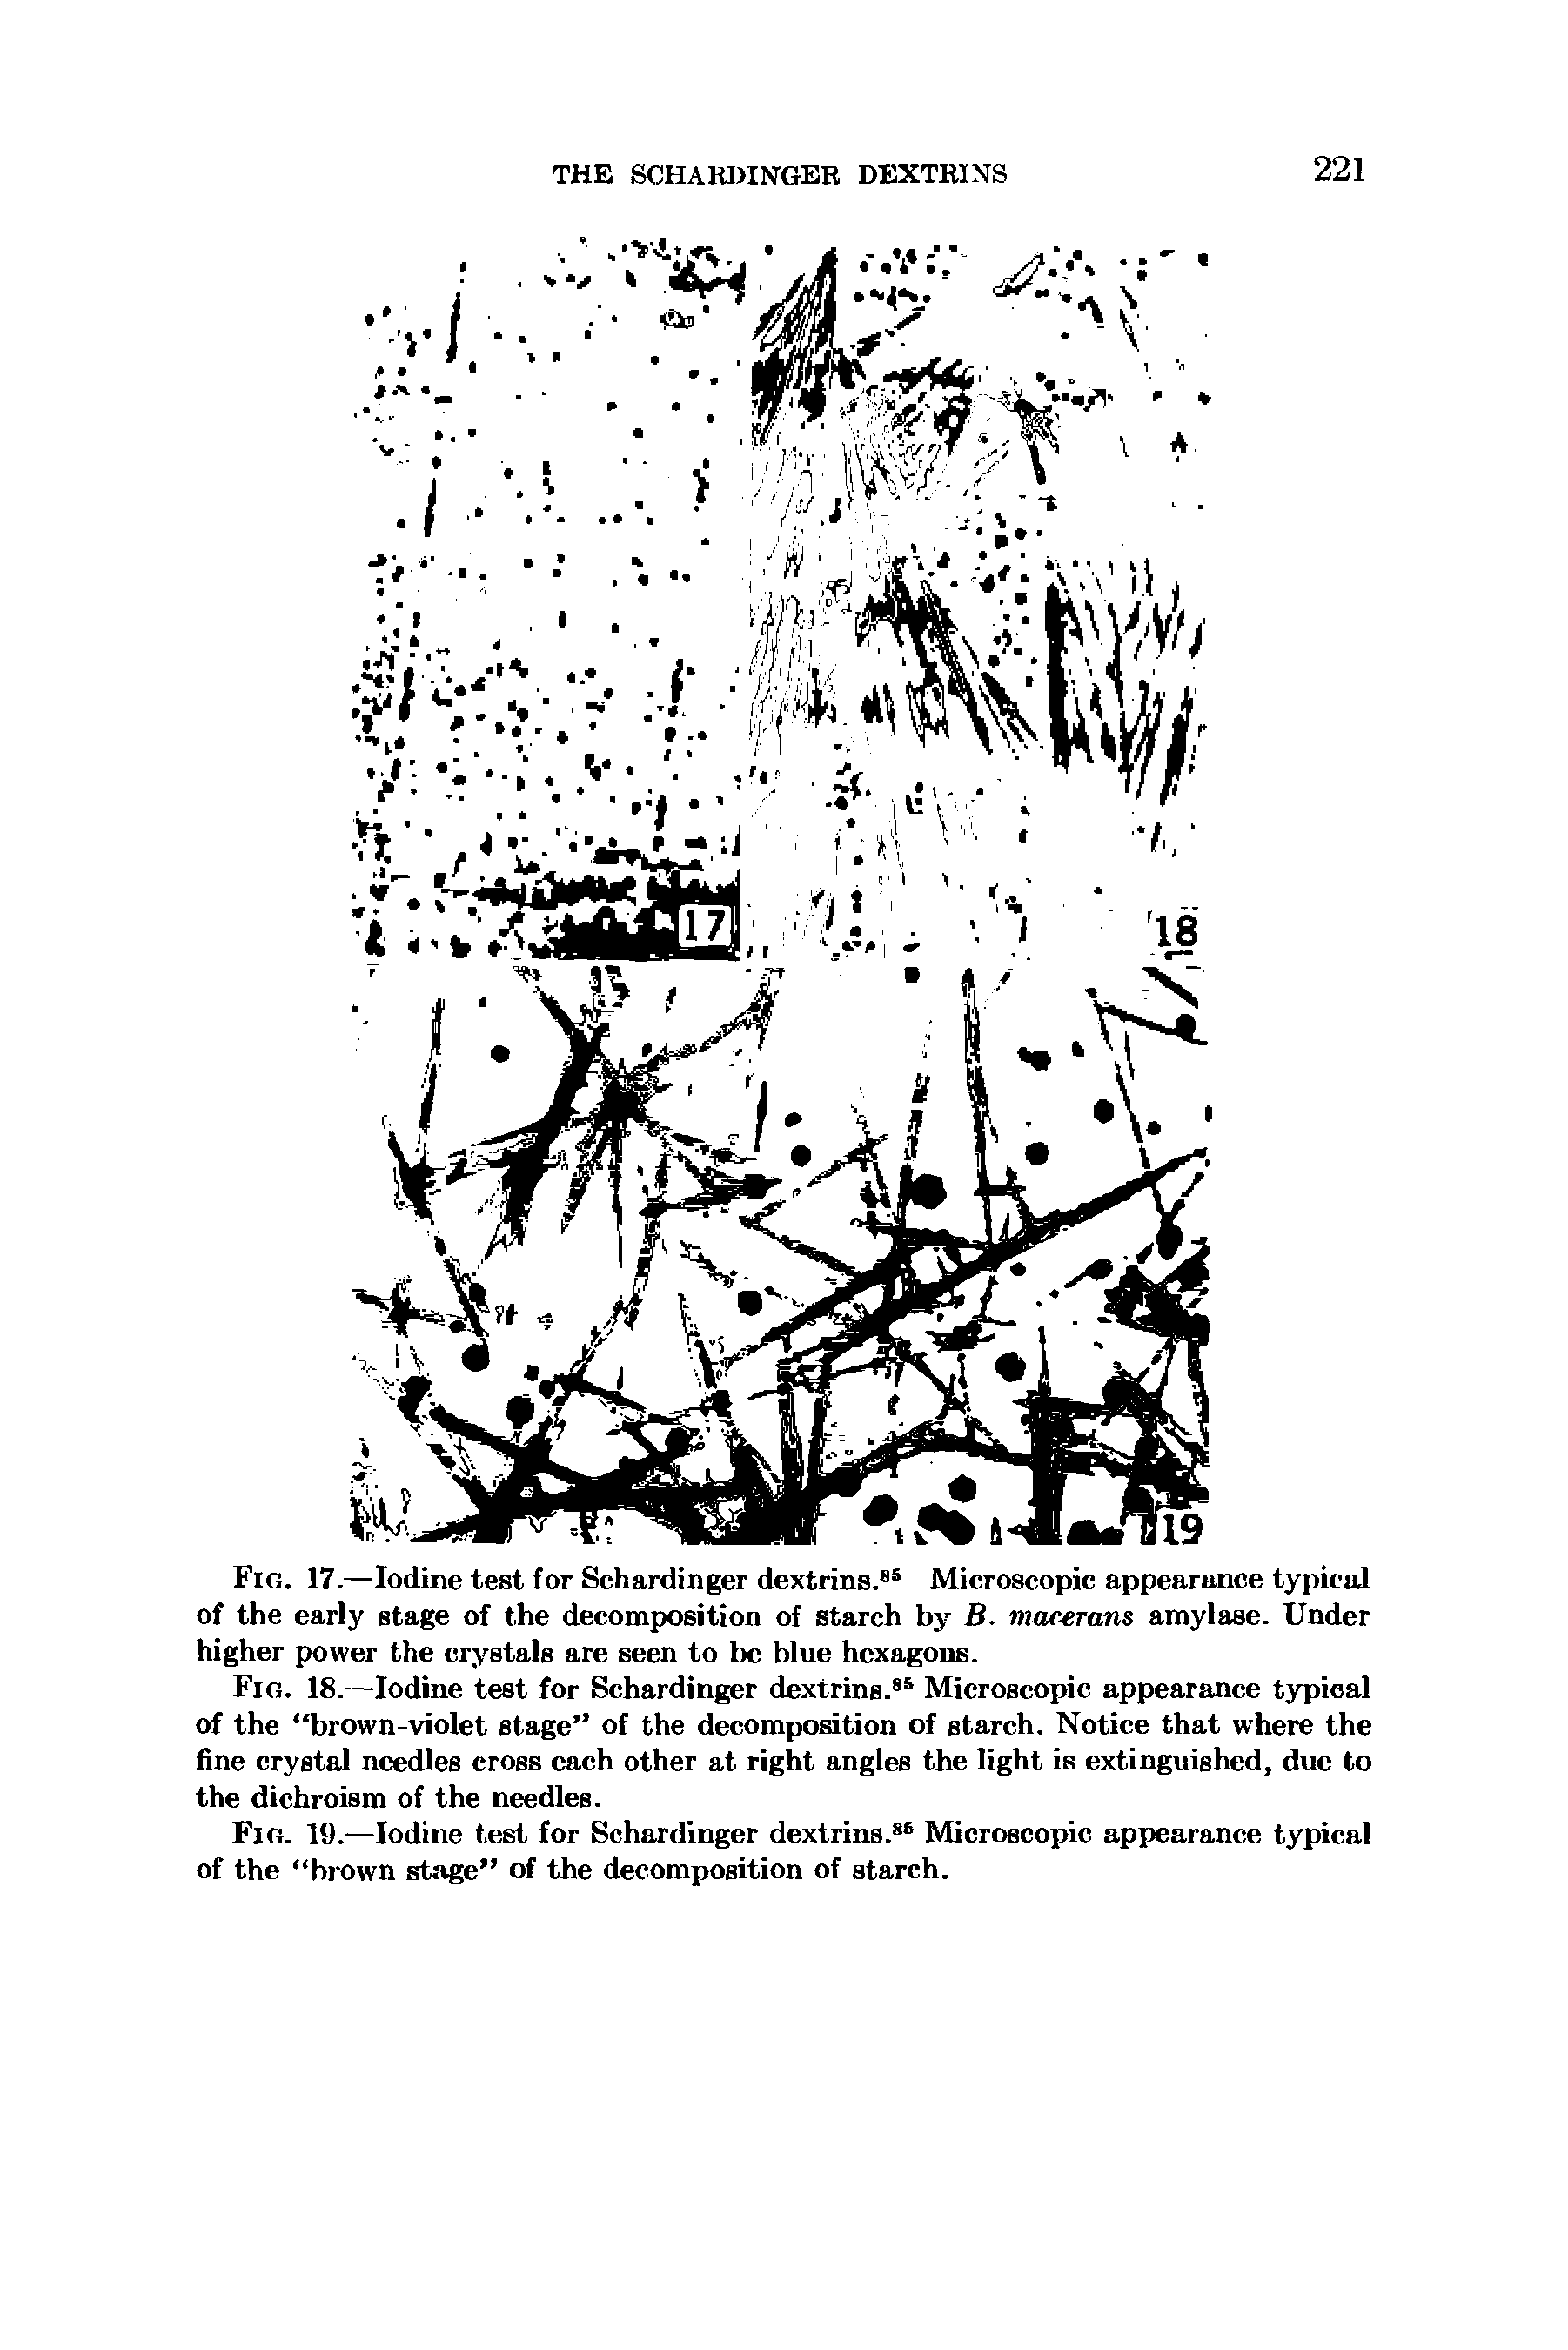 Fig. 17-—Iodine test for Schardinger dextrins. Microscopic appearance typical of the early stage of the decomposition of starch by B. macerans amylase. Under higher power the crystals are seen to be blue hexagons.